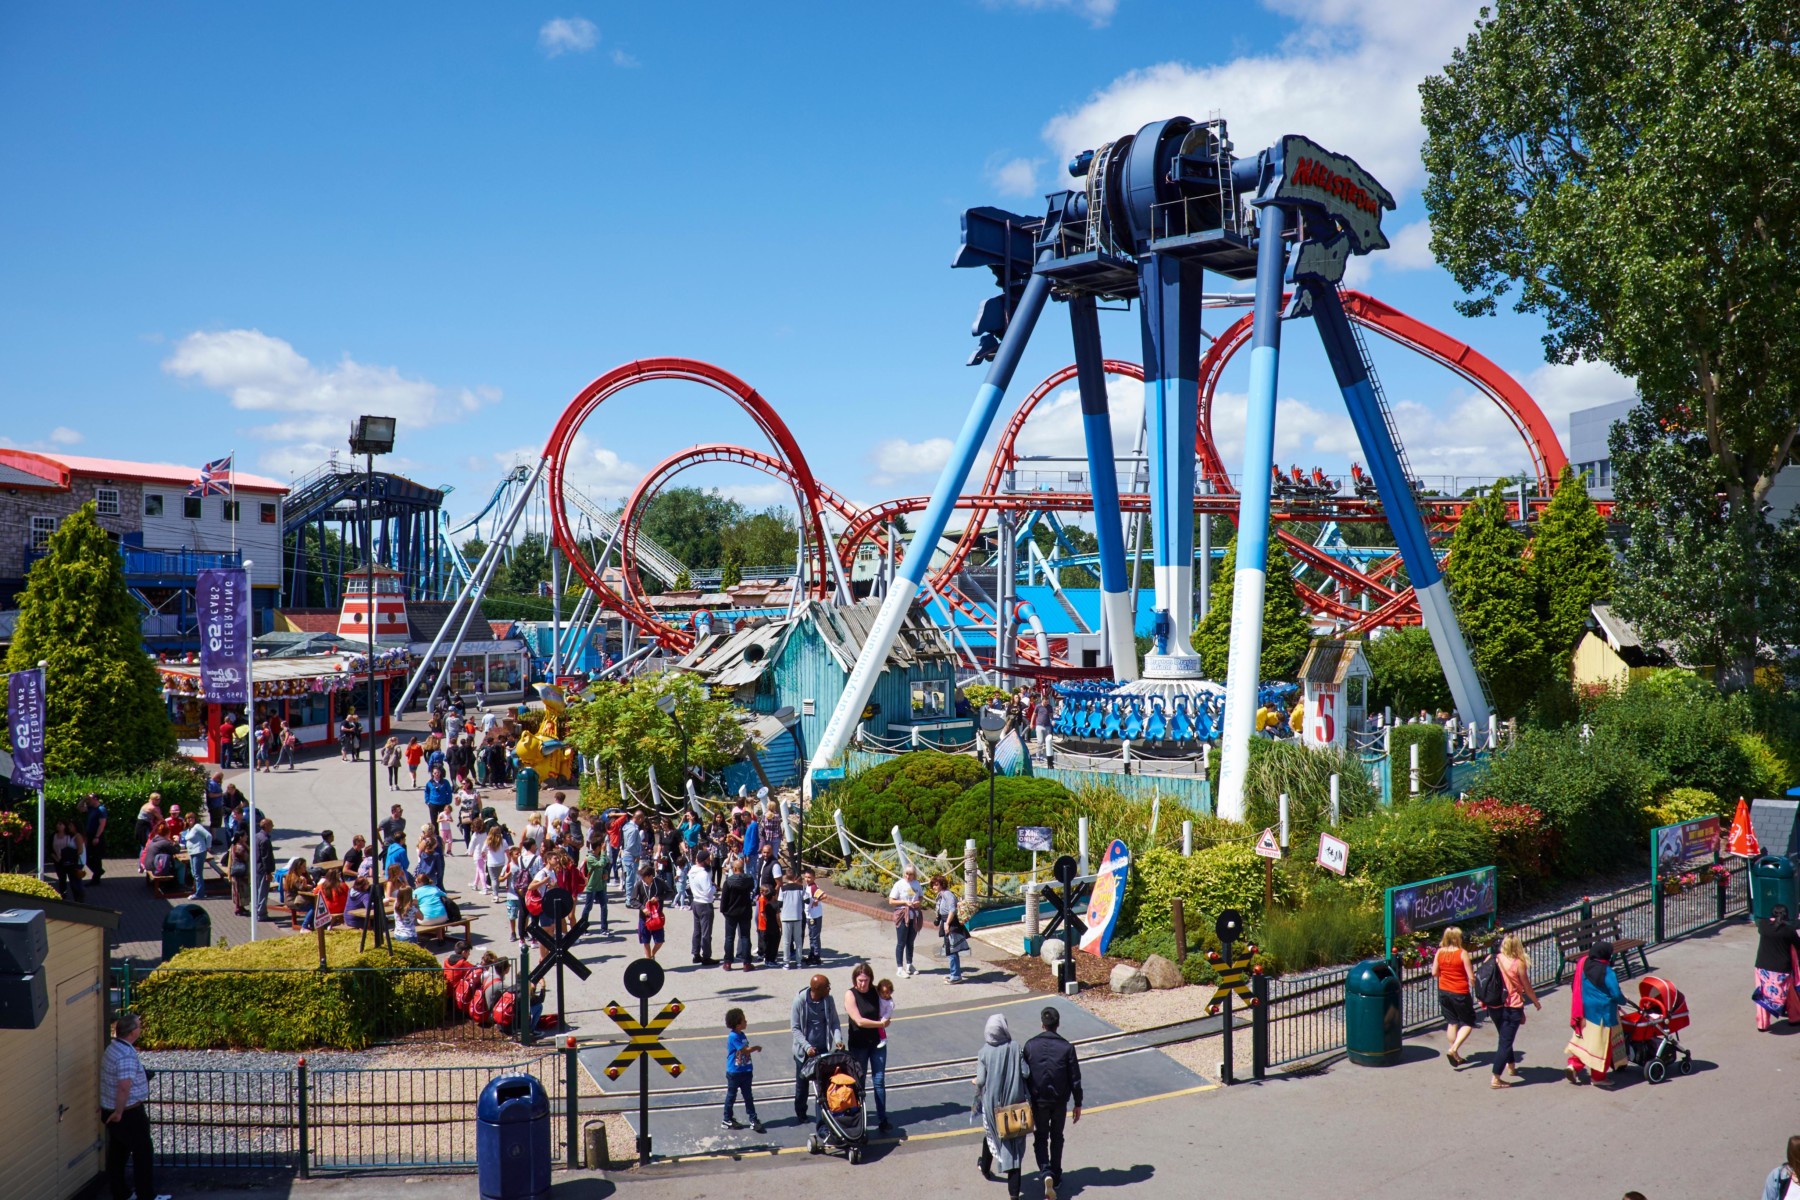 Drayton Manor is to remain closed indefinitely